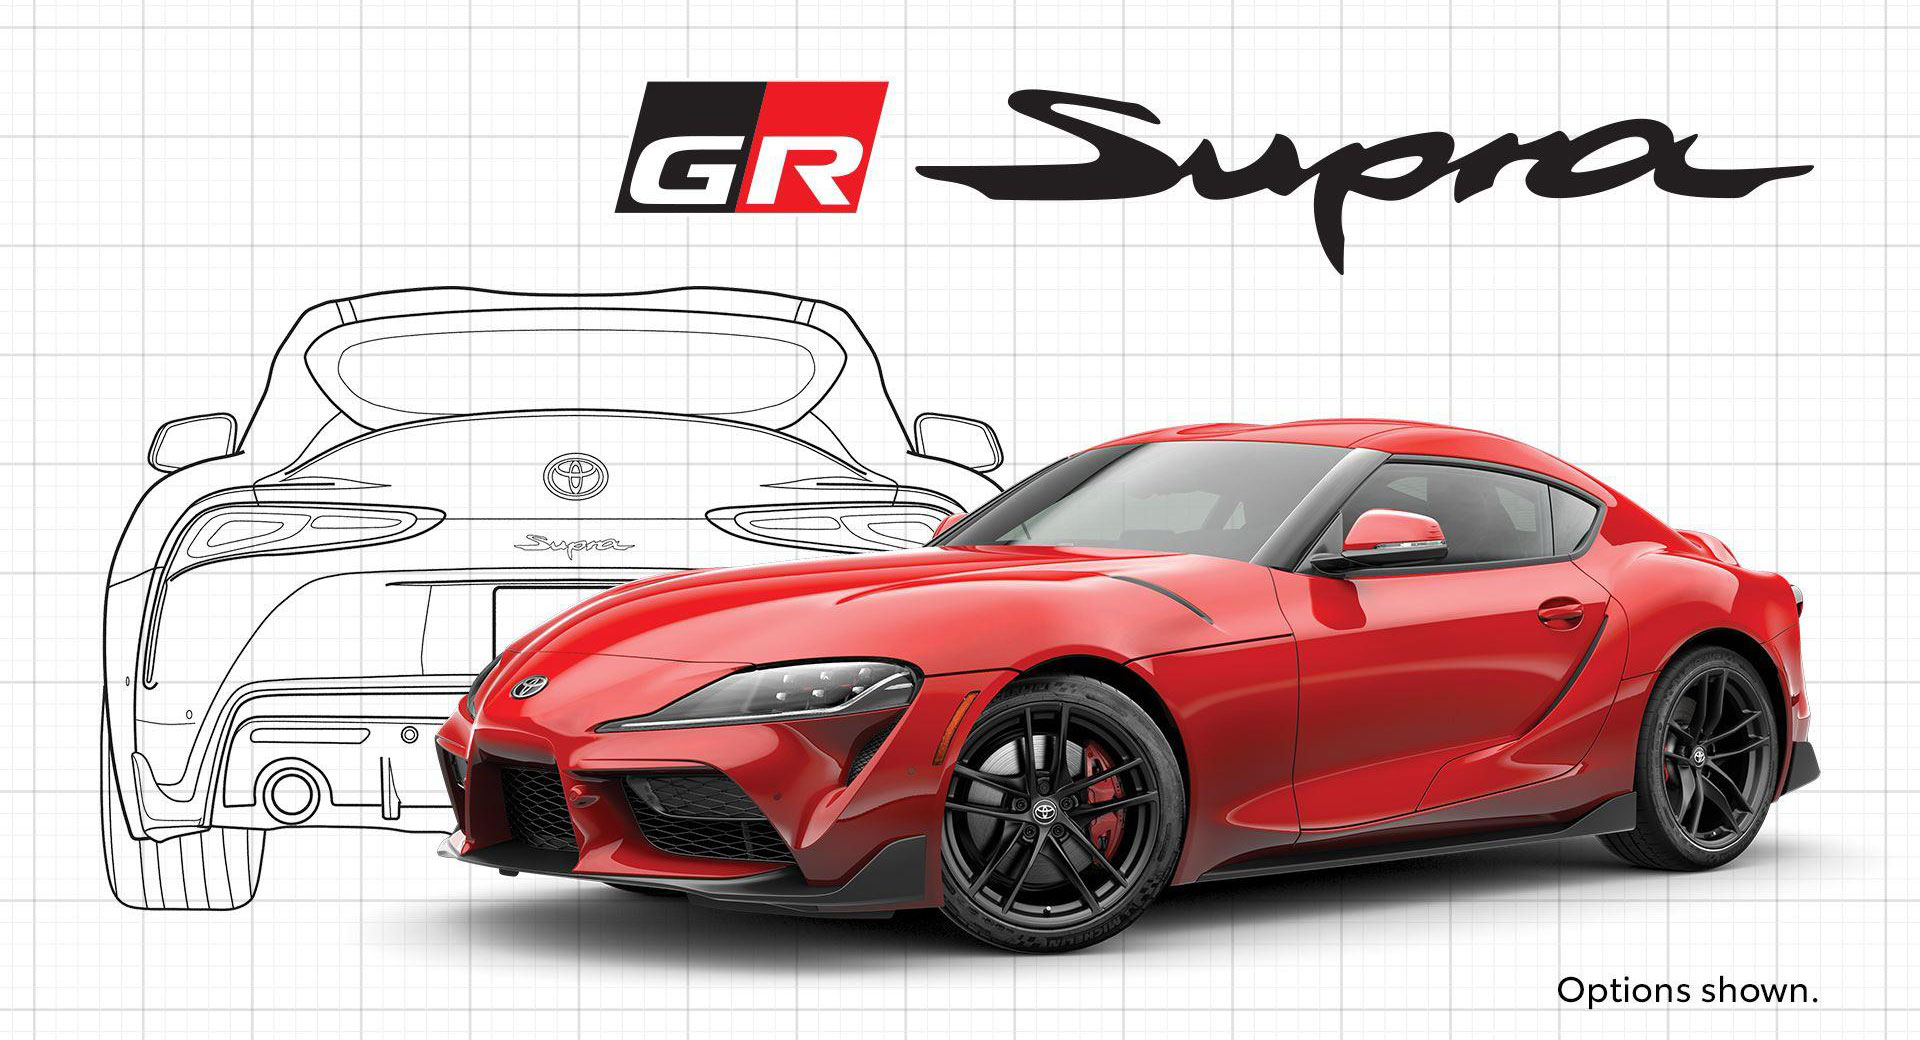 Get A Free 2020 Supra Gr Poster Mailed To Your House On Toyota Carscoops